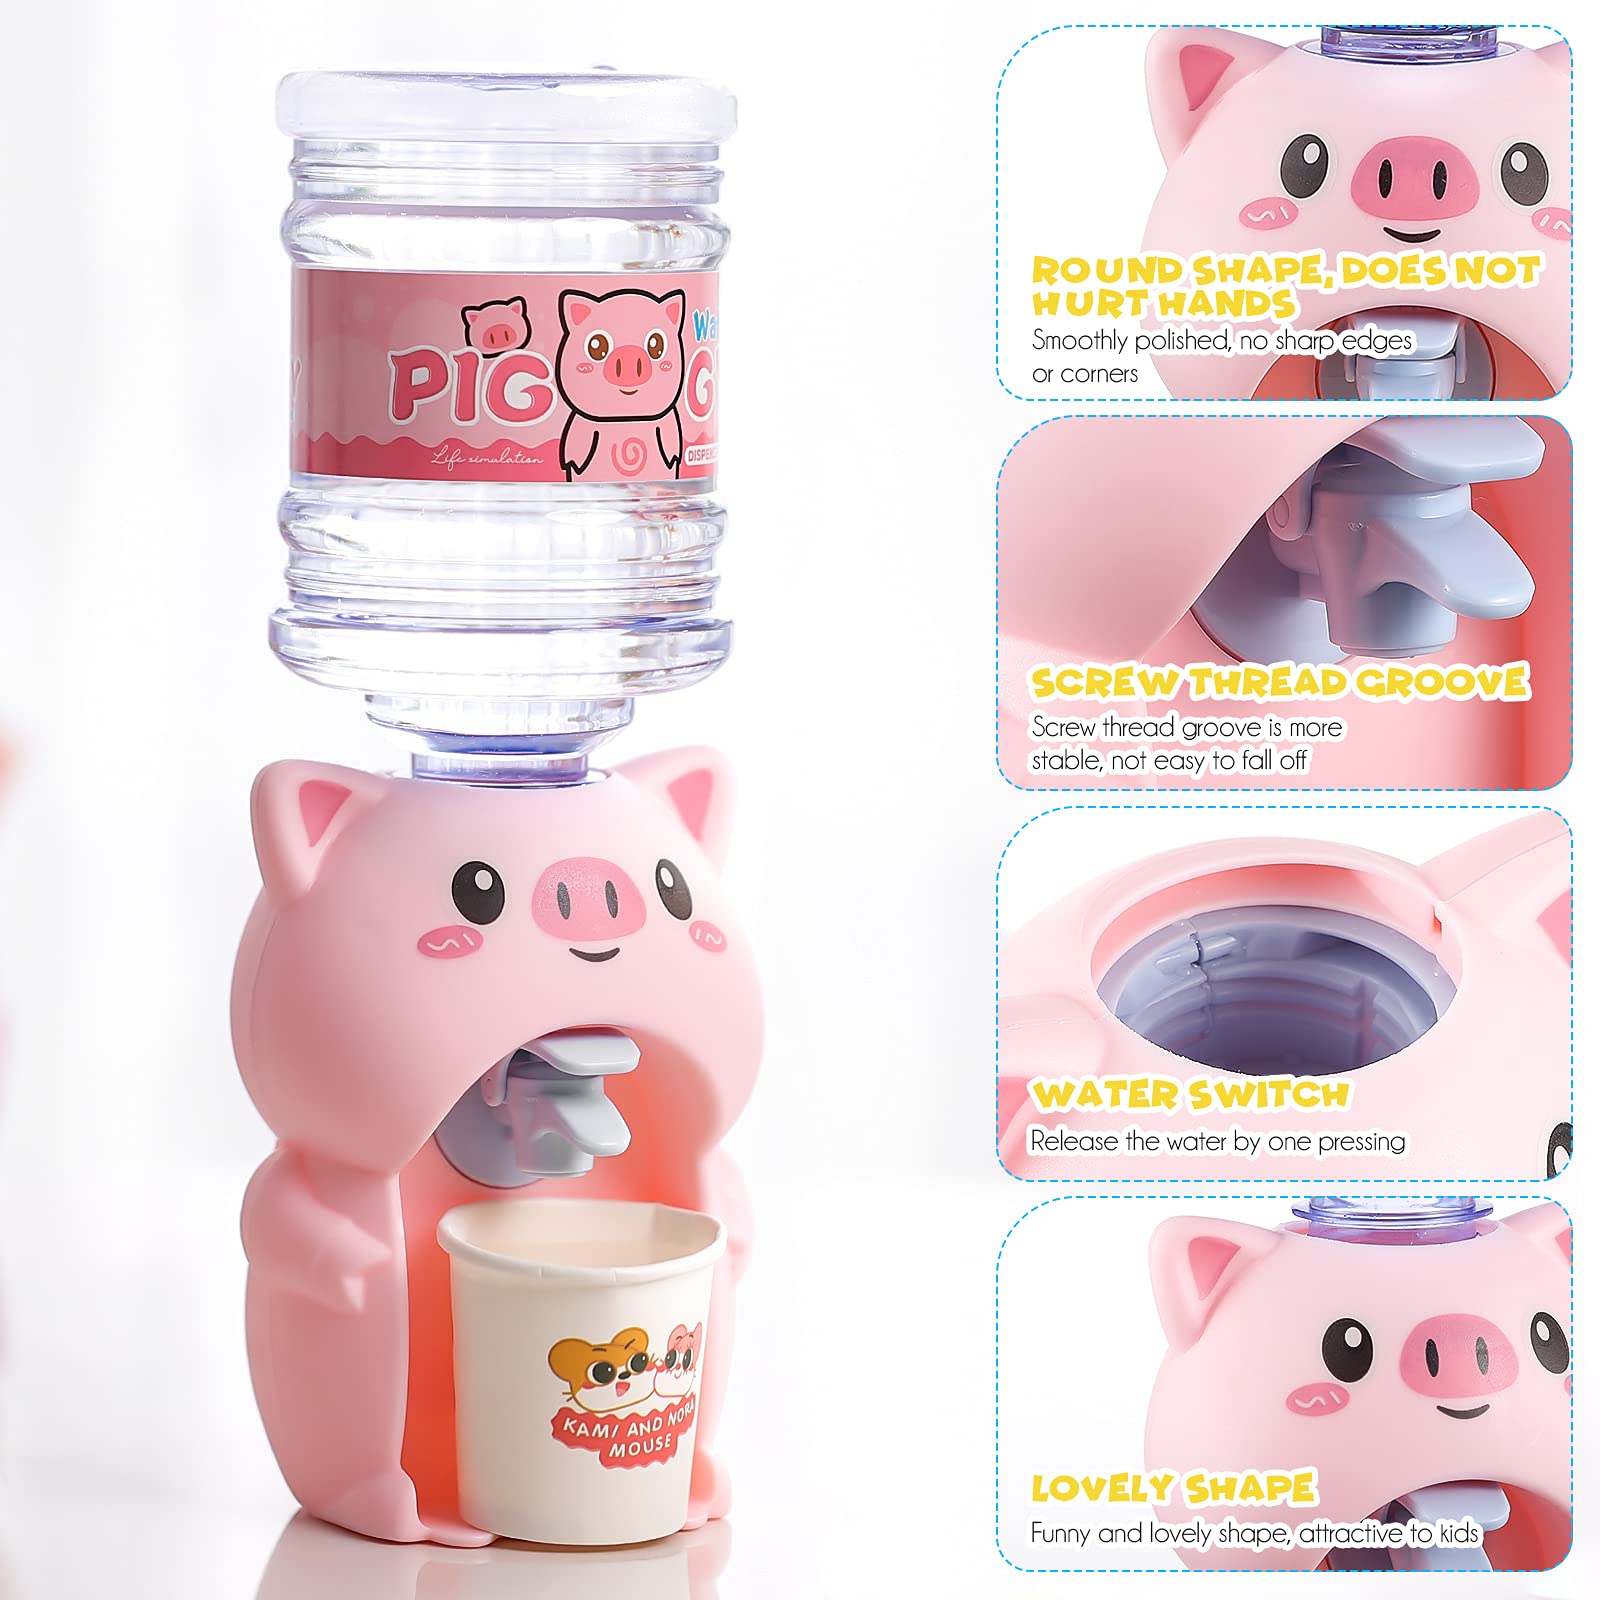 KESYOO Mini Water Dispenser Toy Miniature Household Water Cooler Fountain Toy Cute Pig Drinking Fountain Model Kids Pretend Play Kitchen Supplies (Pink)